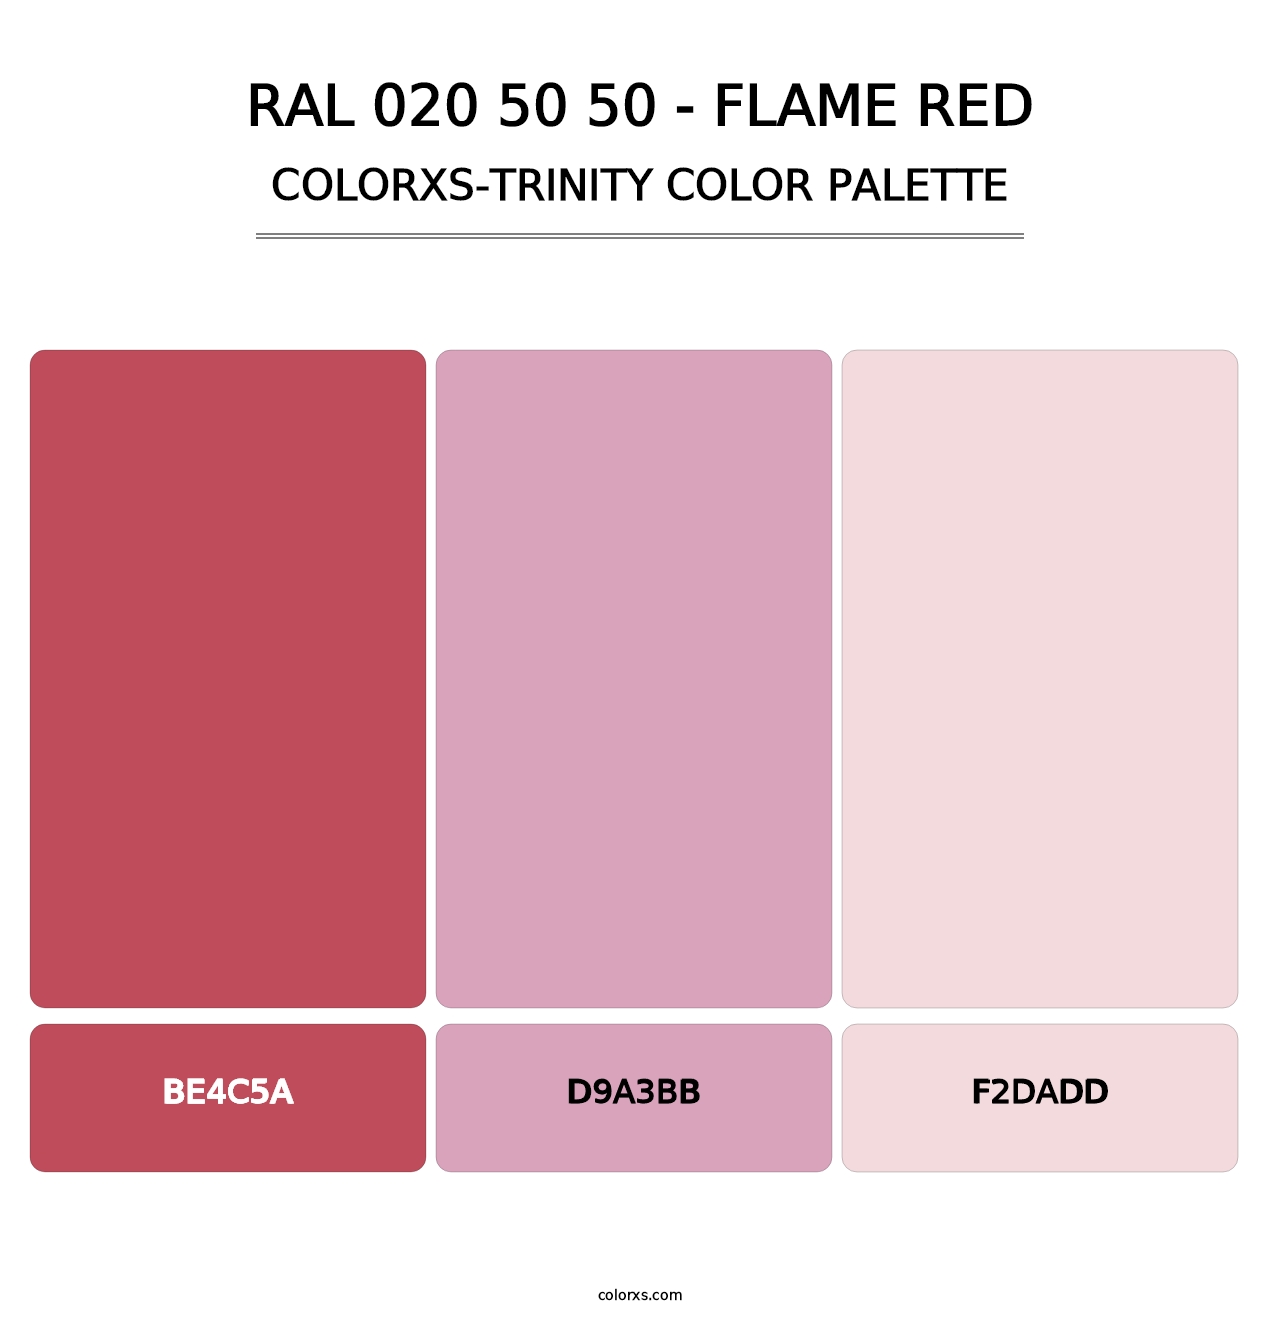 RAL 020 50 50 - Flame Red - Colorxs Trinity Palette